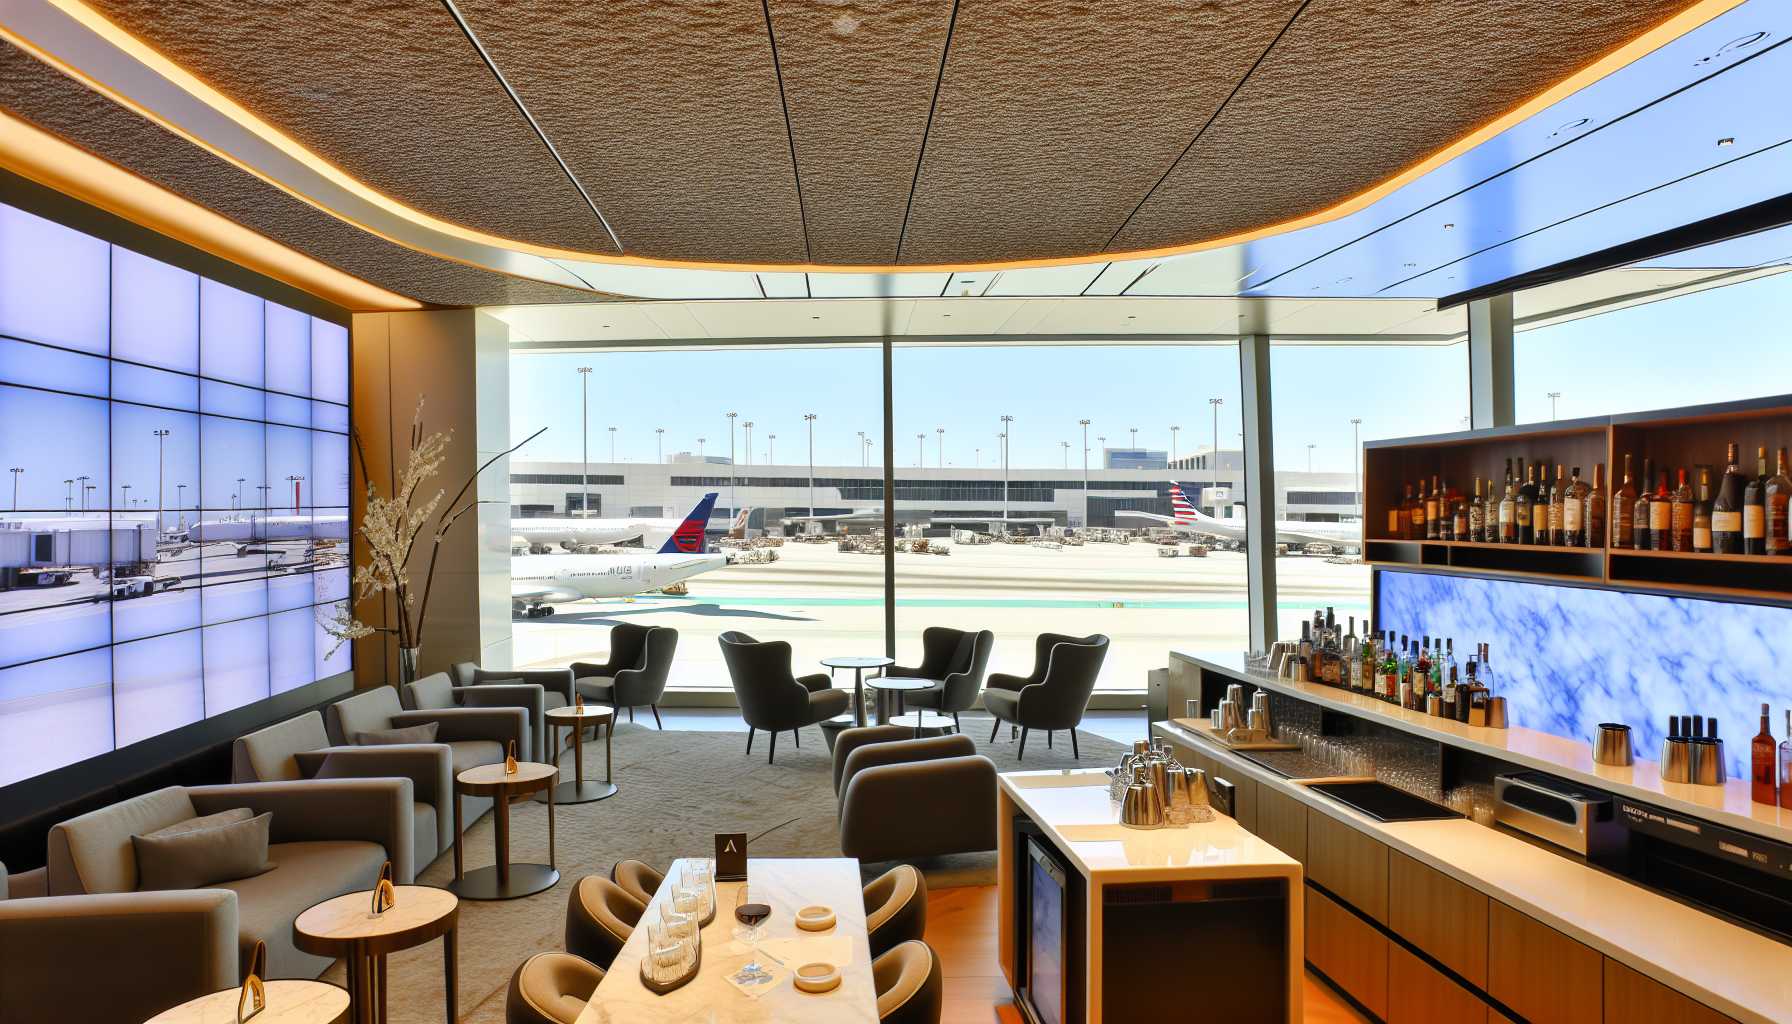 Exploring the new oasis of luxury by Air France: The LAX lounge experience